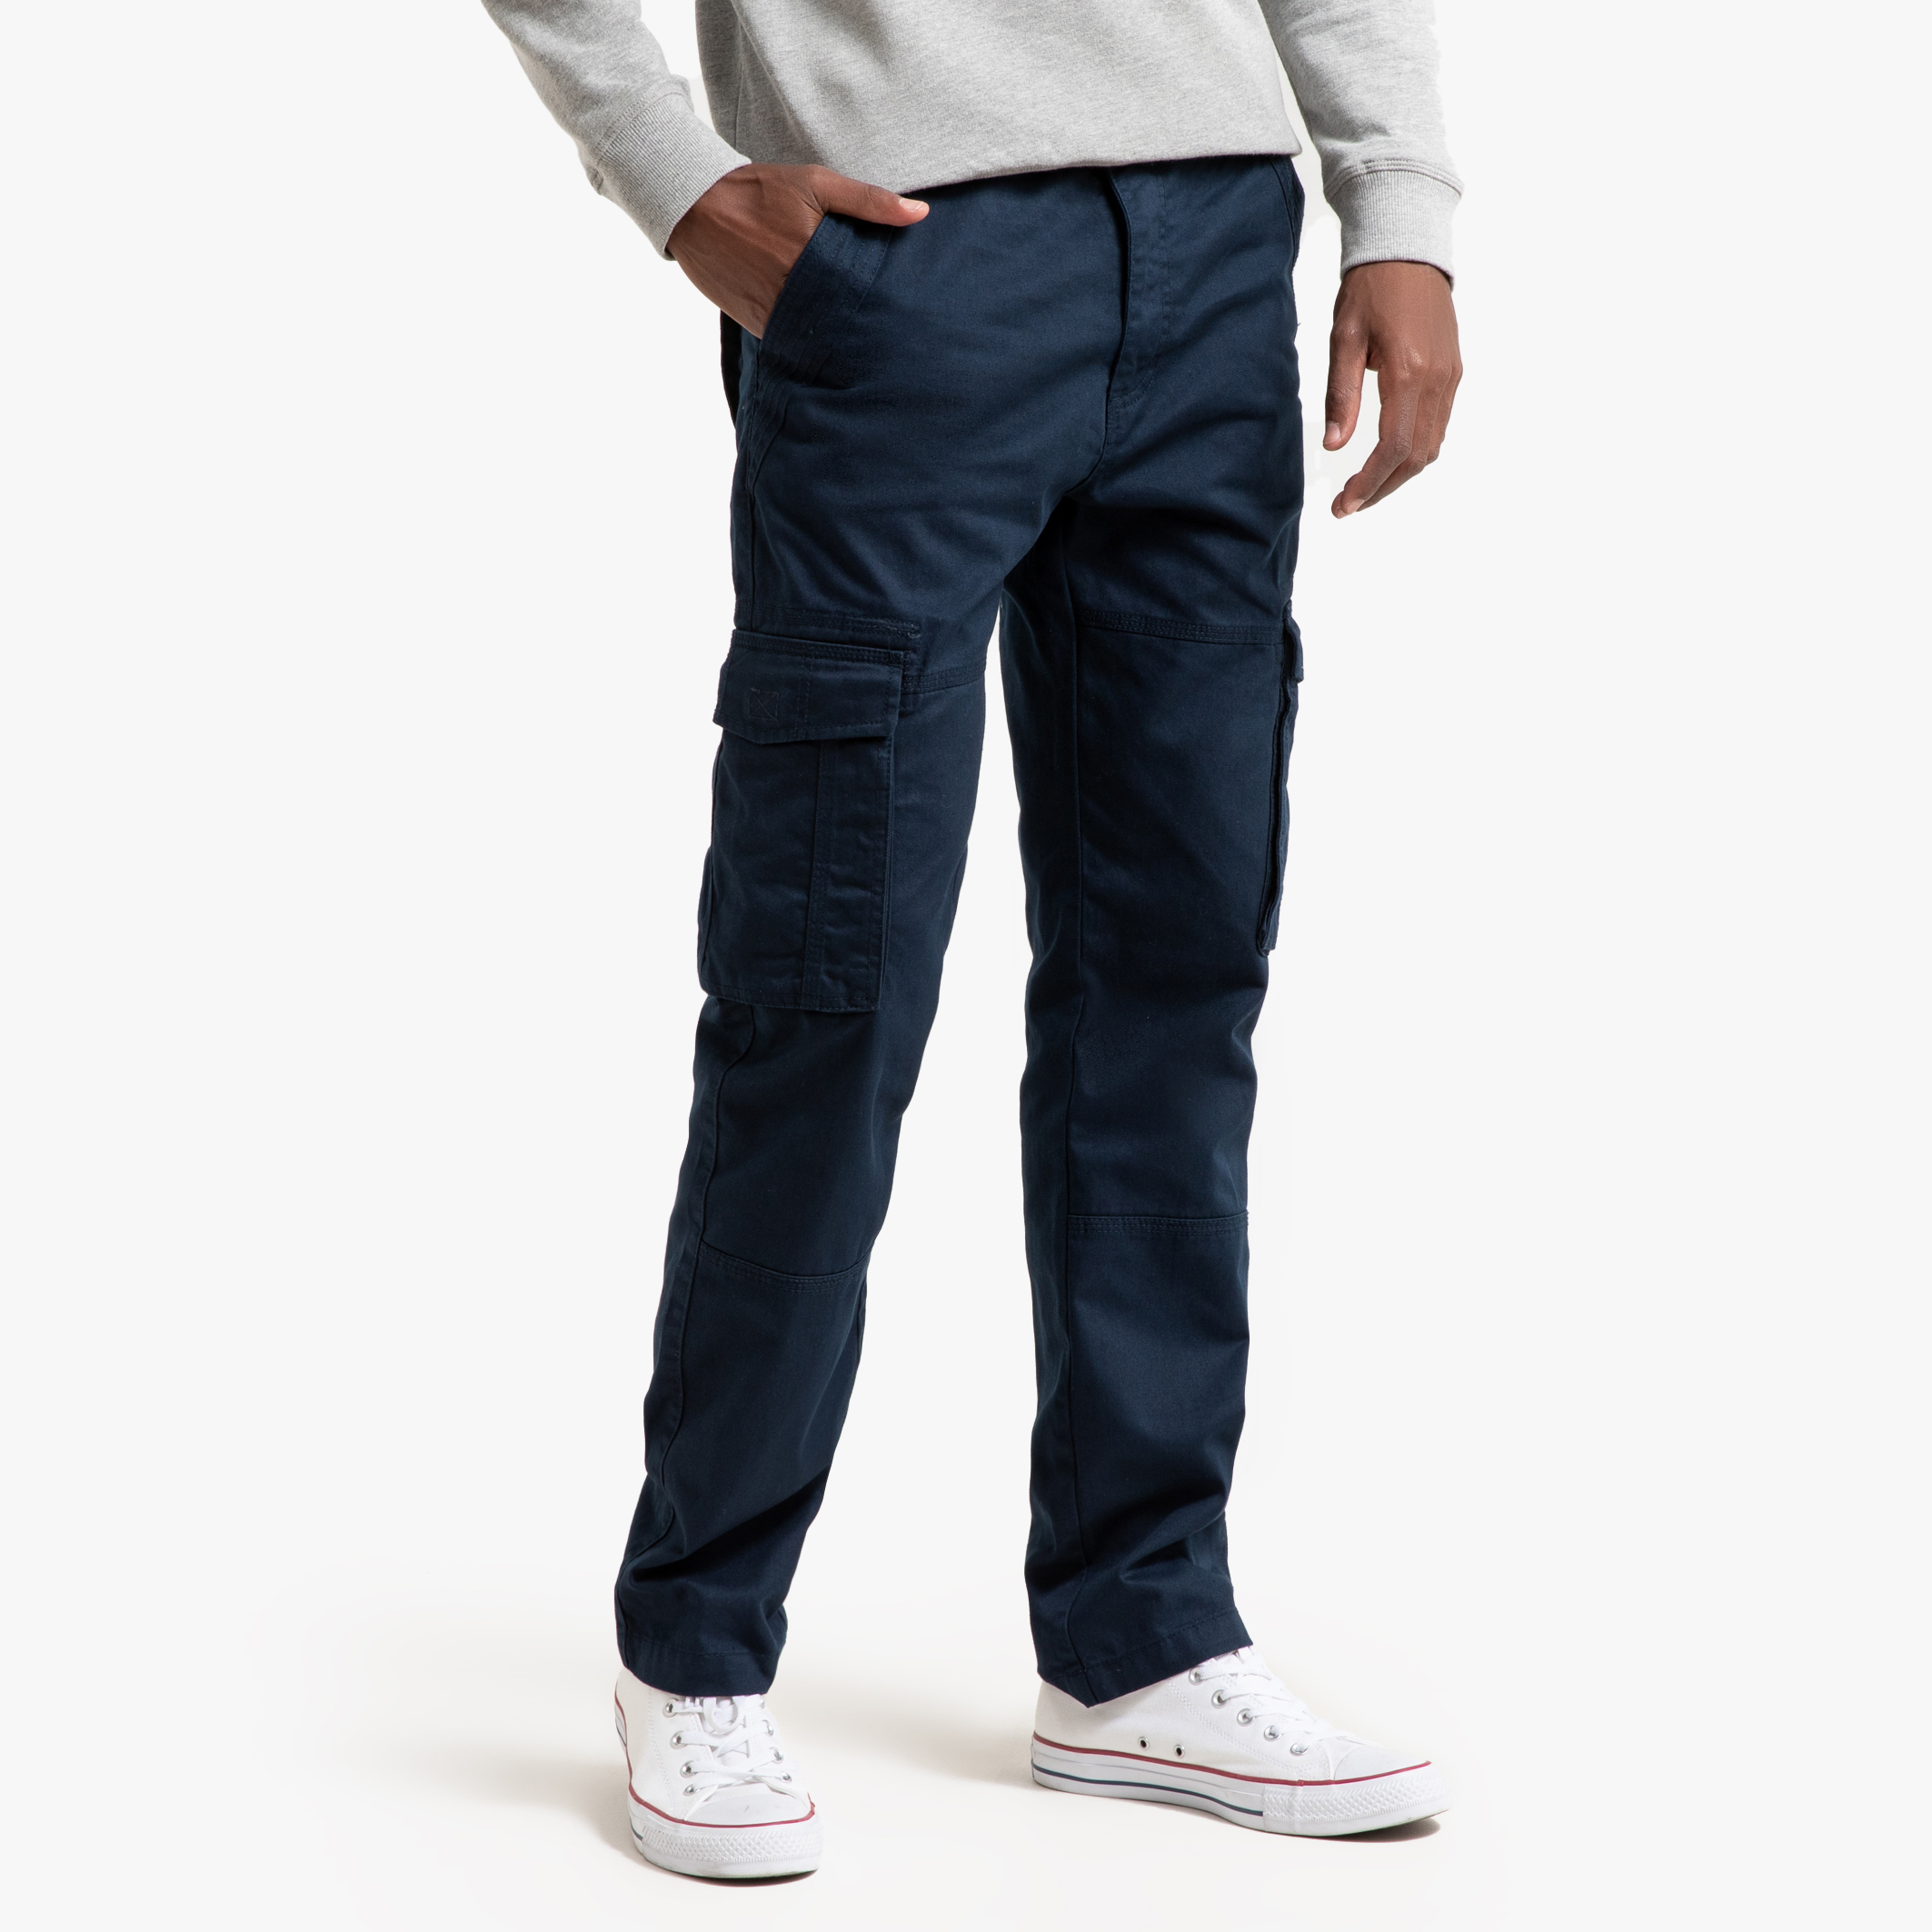 Outlet - Jeans Hombre Tallas | Redoute